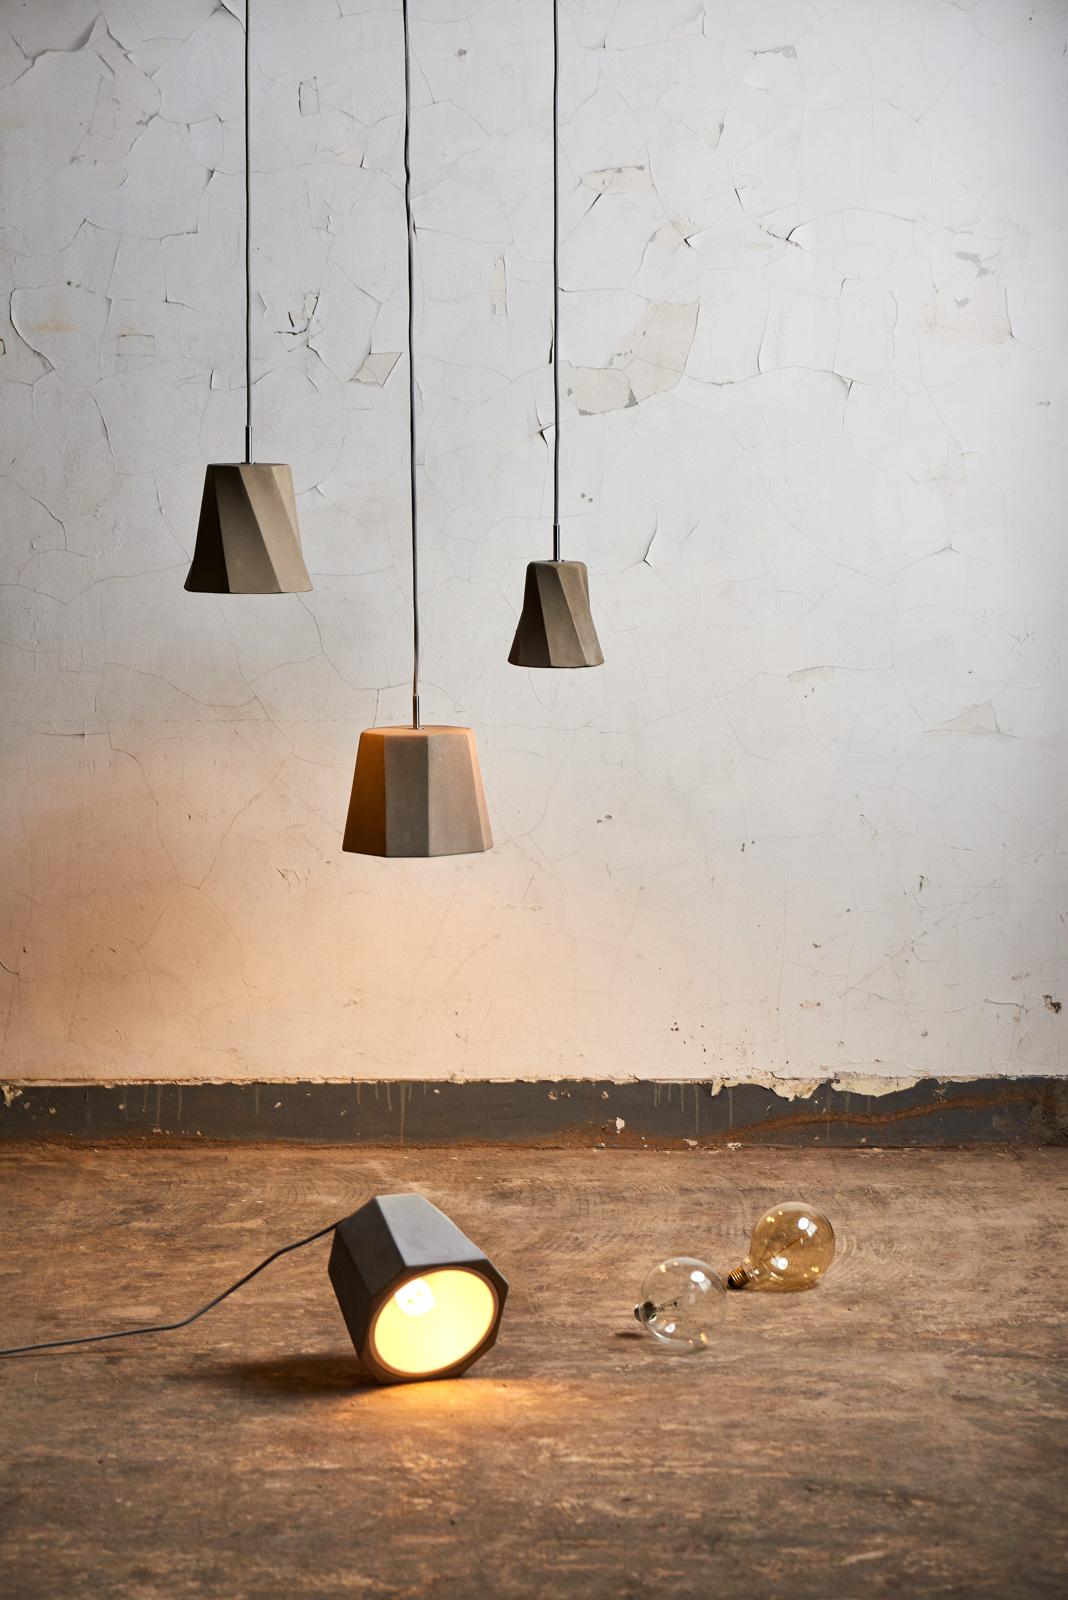 “One, two, three; one, two, three”
Inspired by the movement of a dancing women’s dress, the castle swing pendant propells a solid concrete shade to move. A simple twist in the shape gives an otherwise heavy material a lightness that evokes a sense